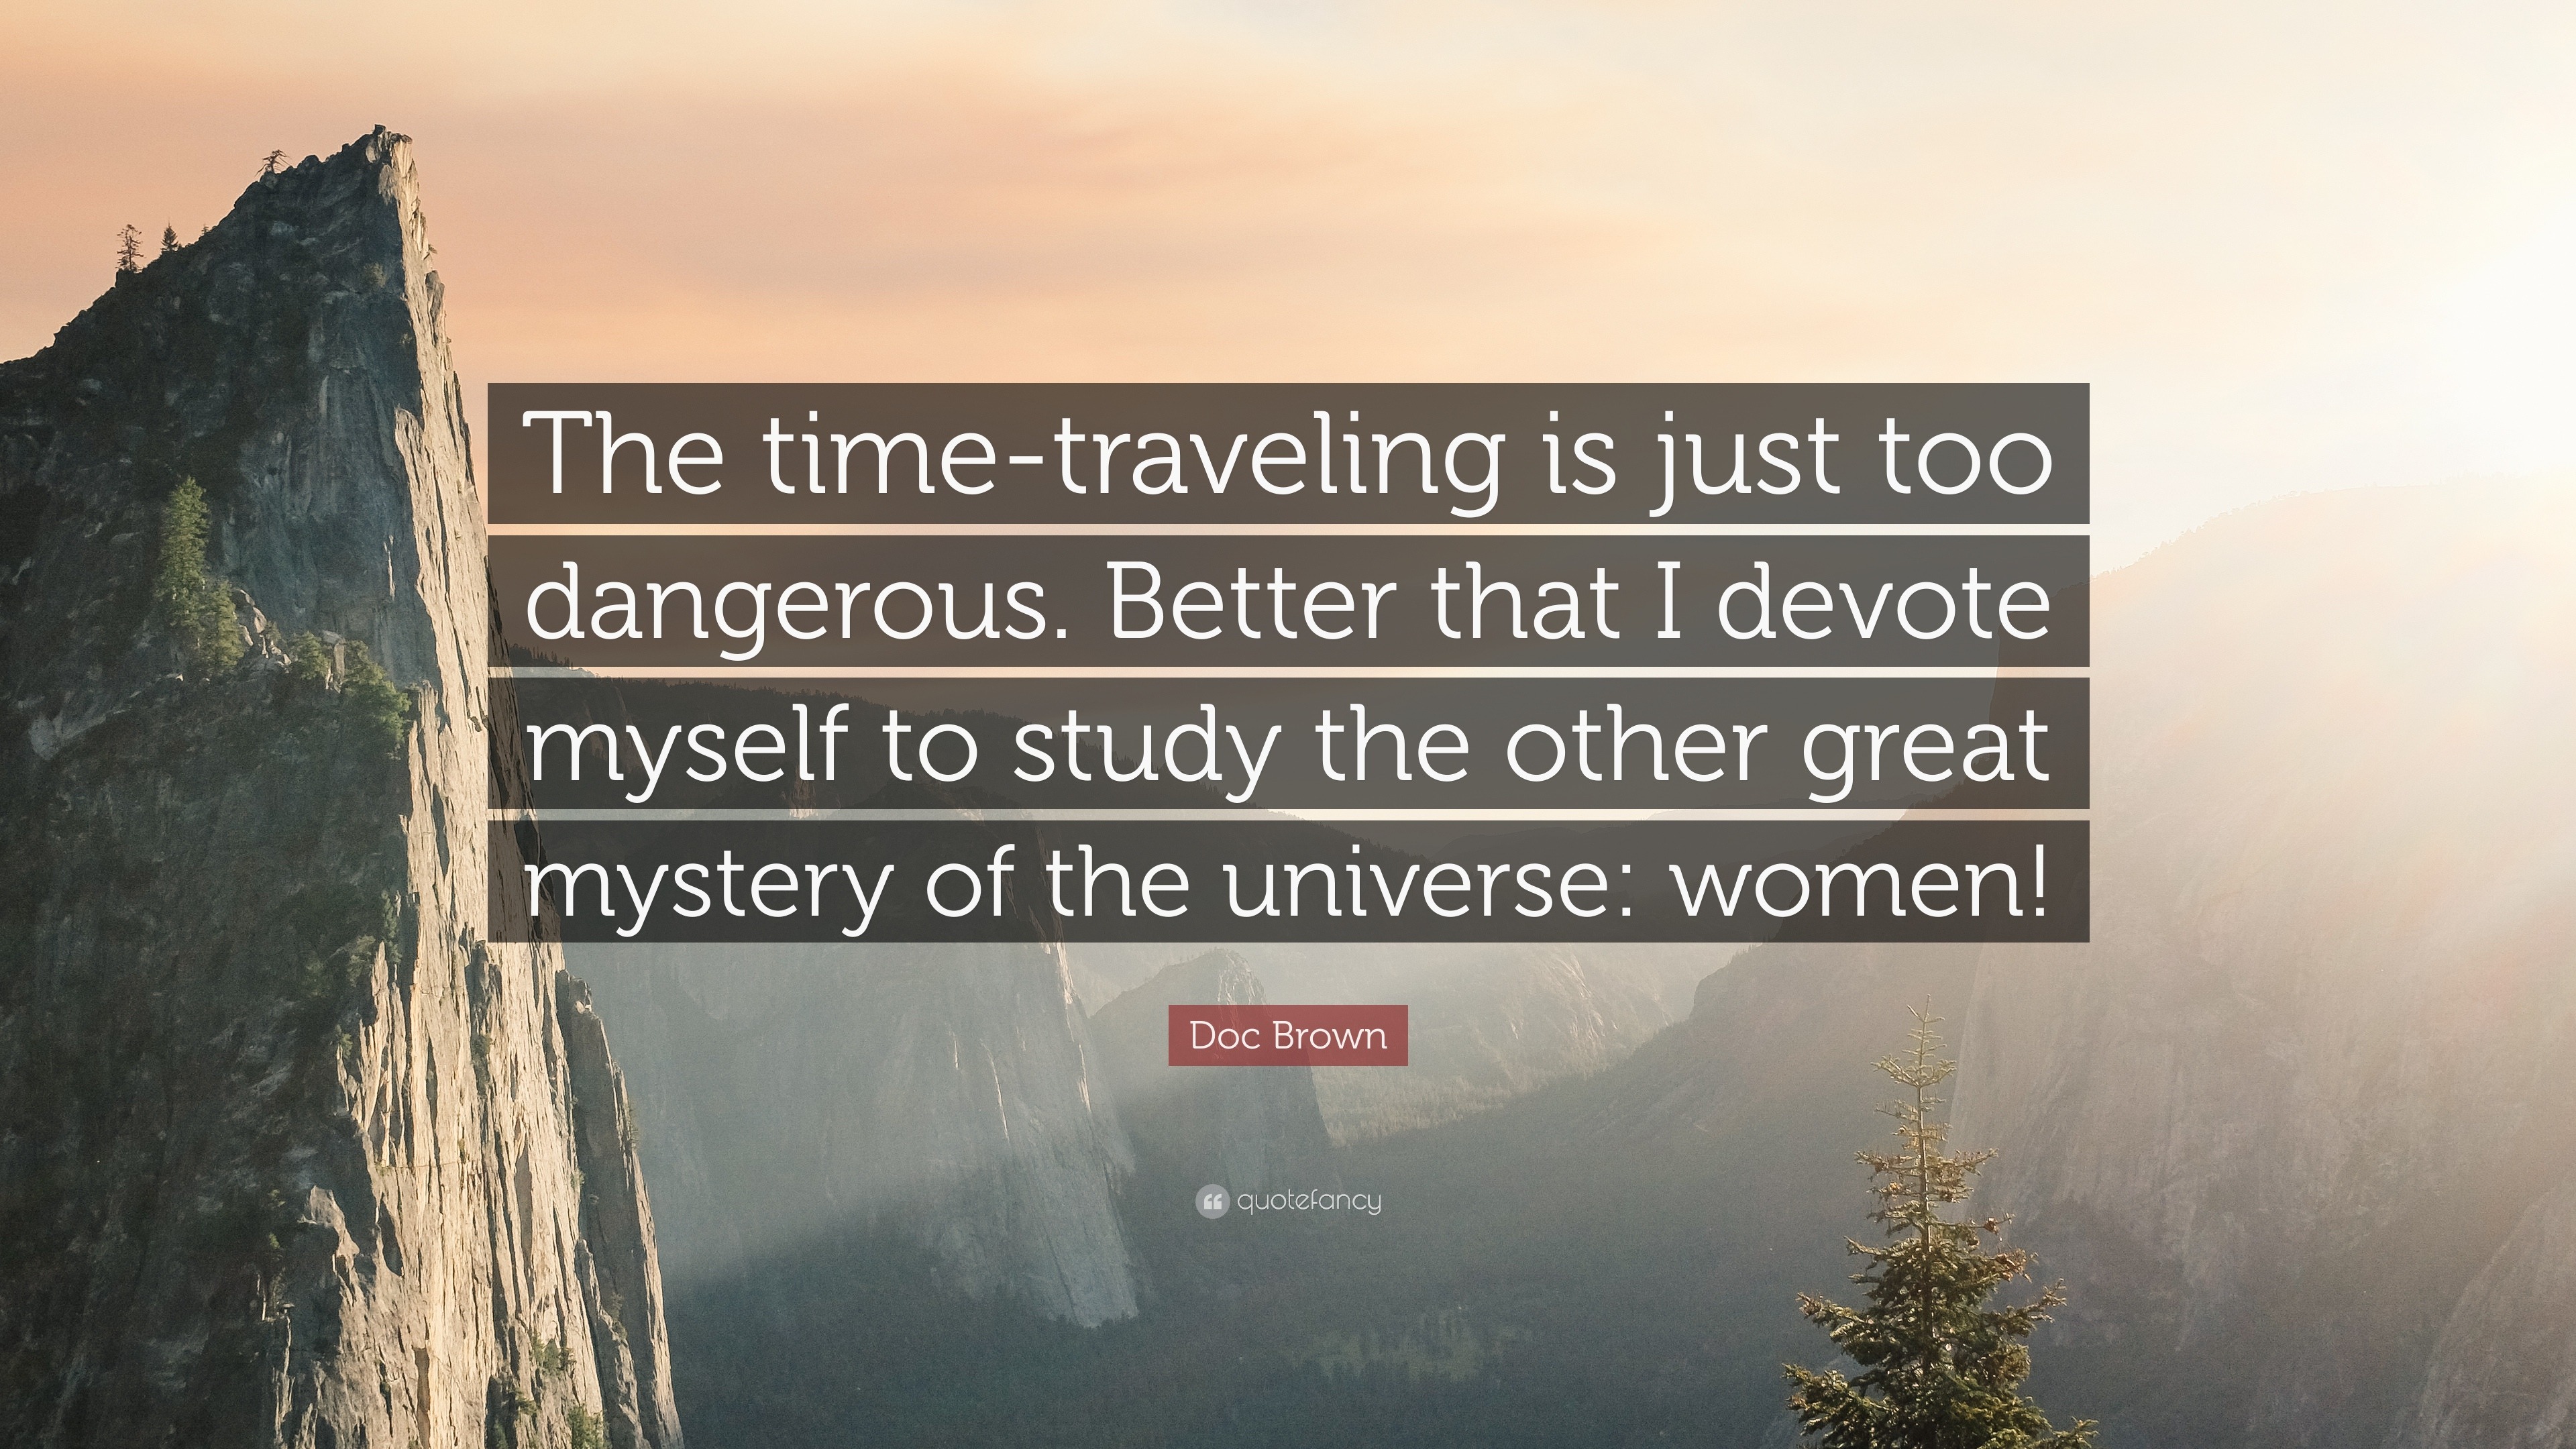 Doc Brown Quote: “The time-traveling is just too dangerous. Better that I  devote myself to study the other great mystery of the universe: ...”